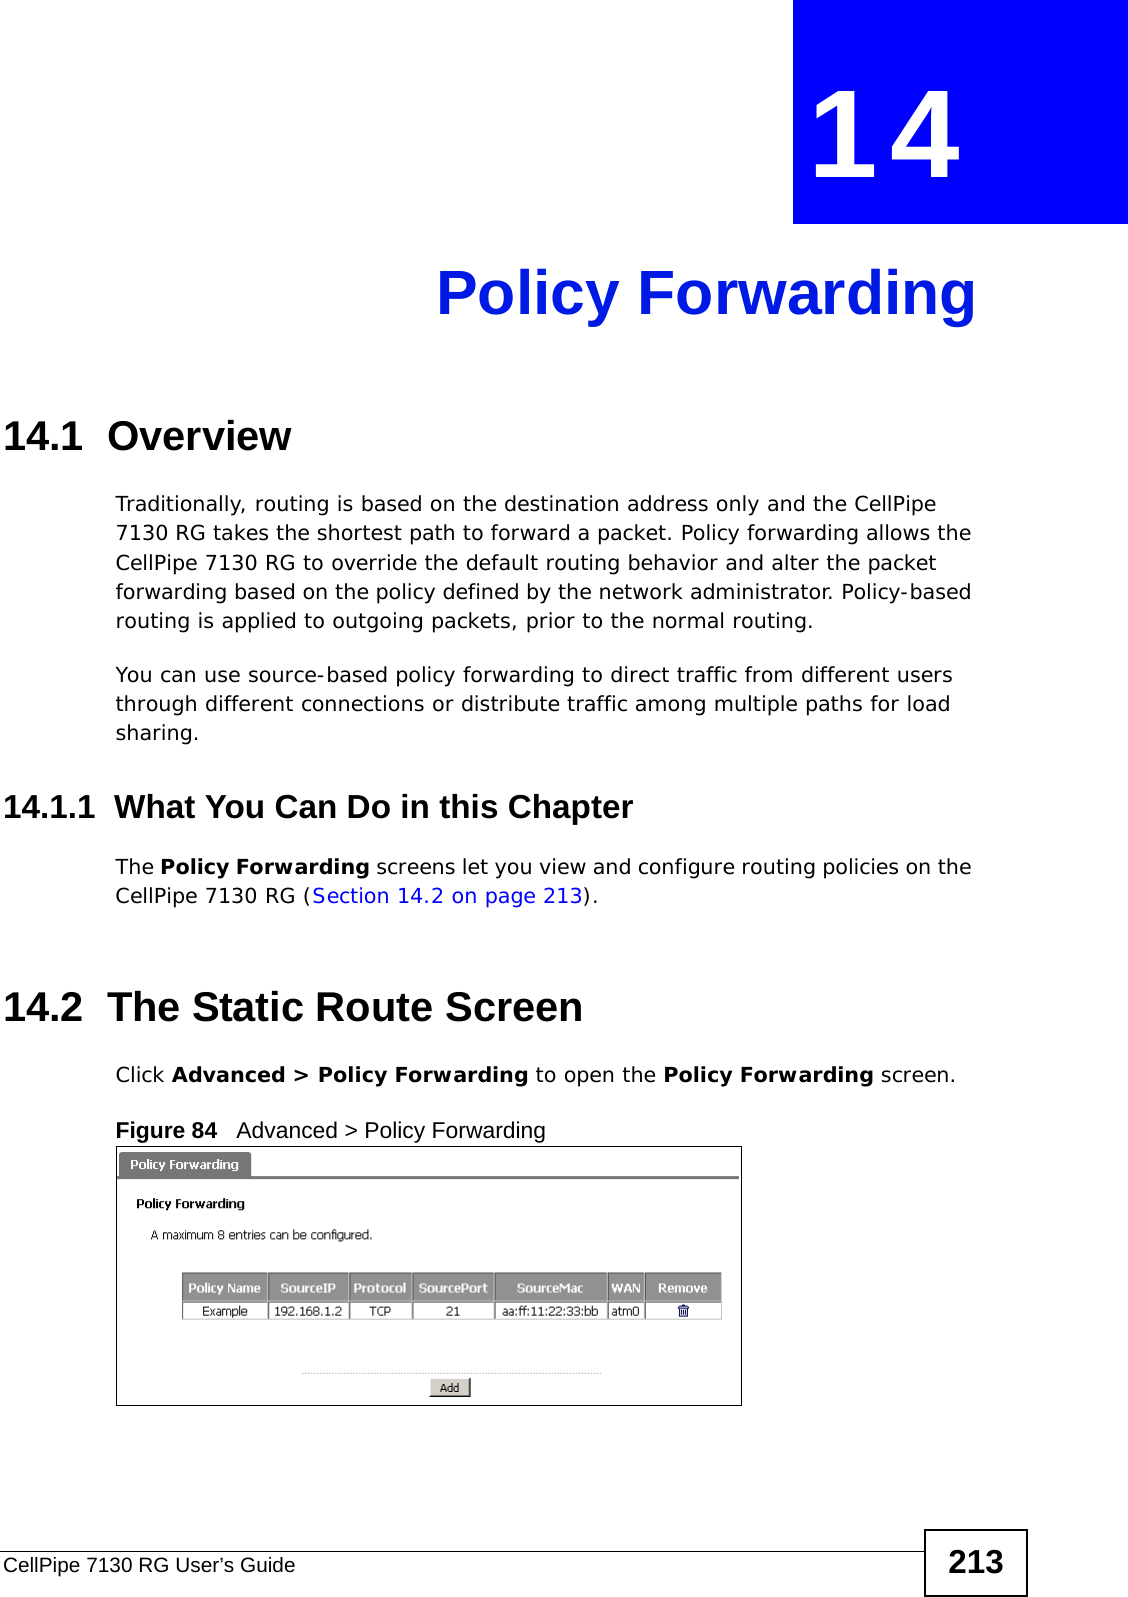 CellPipe 7130 RG User’s Guide 213CHAPTER  14 Policy Forwarding14.1  Overview   Traditionally, routing is based on the destination address only and the CellPipe 7130 RG takes the shortest path to forward a packet. Policy forwarding allows the CellPipe 7130 RG to override the default routing behavior and alter the packet forwarding based on the policy defined by the network administrator. Policy-based routing is applied to outgoing packets, prior to the normal routing.You can use source-based policy forwarding to direct traffic from different users through different connections or distribute traffic among multiple paths for load sharing.14.1.1  What You Can Do in this ChapterThe Policy Forwarding screens let you view and configure routing policies on the CellPipe 7130 RG (Section 14.2 on page 213).14.2  The Static Route ScreenClick Advanced &gt; Policy Forwarding to open the Policy Forwarding screen. Figure 84   Advanced &gt; Policy Forwarding